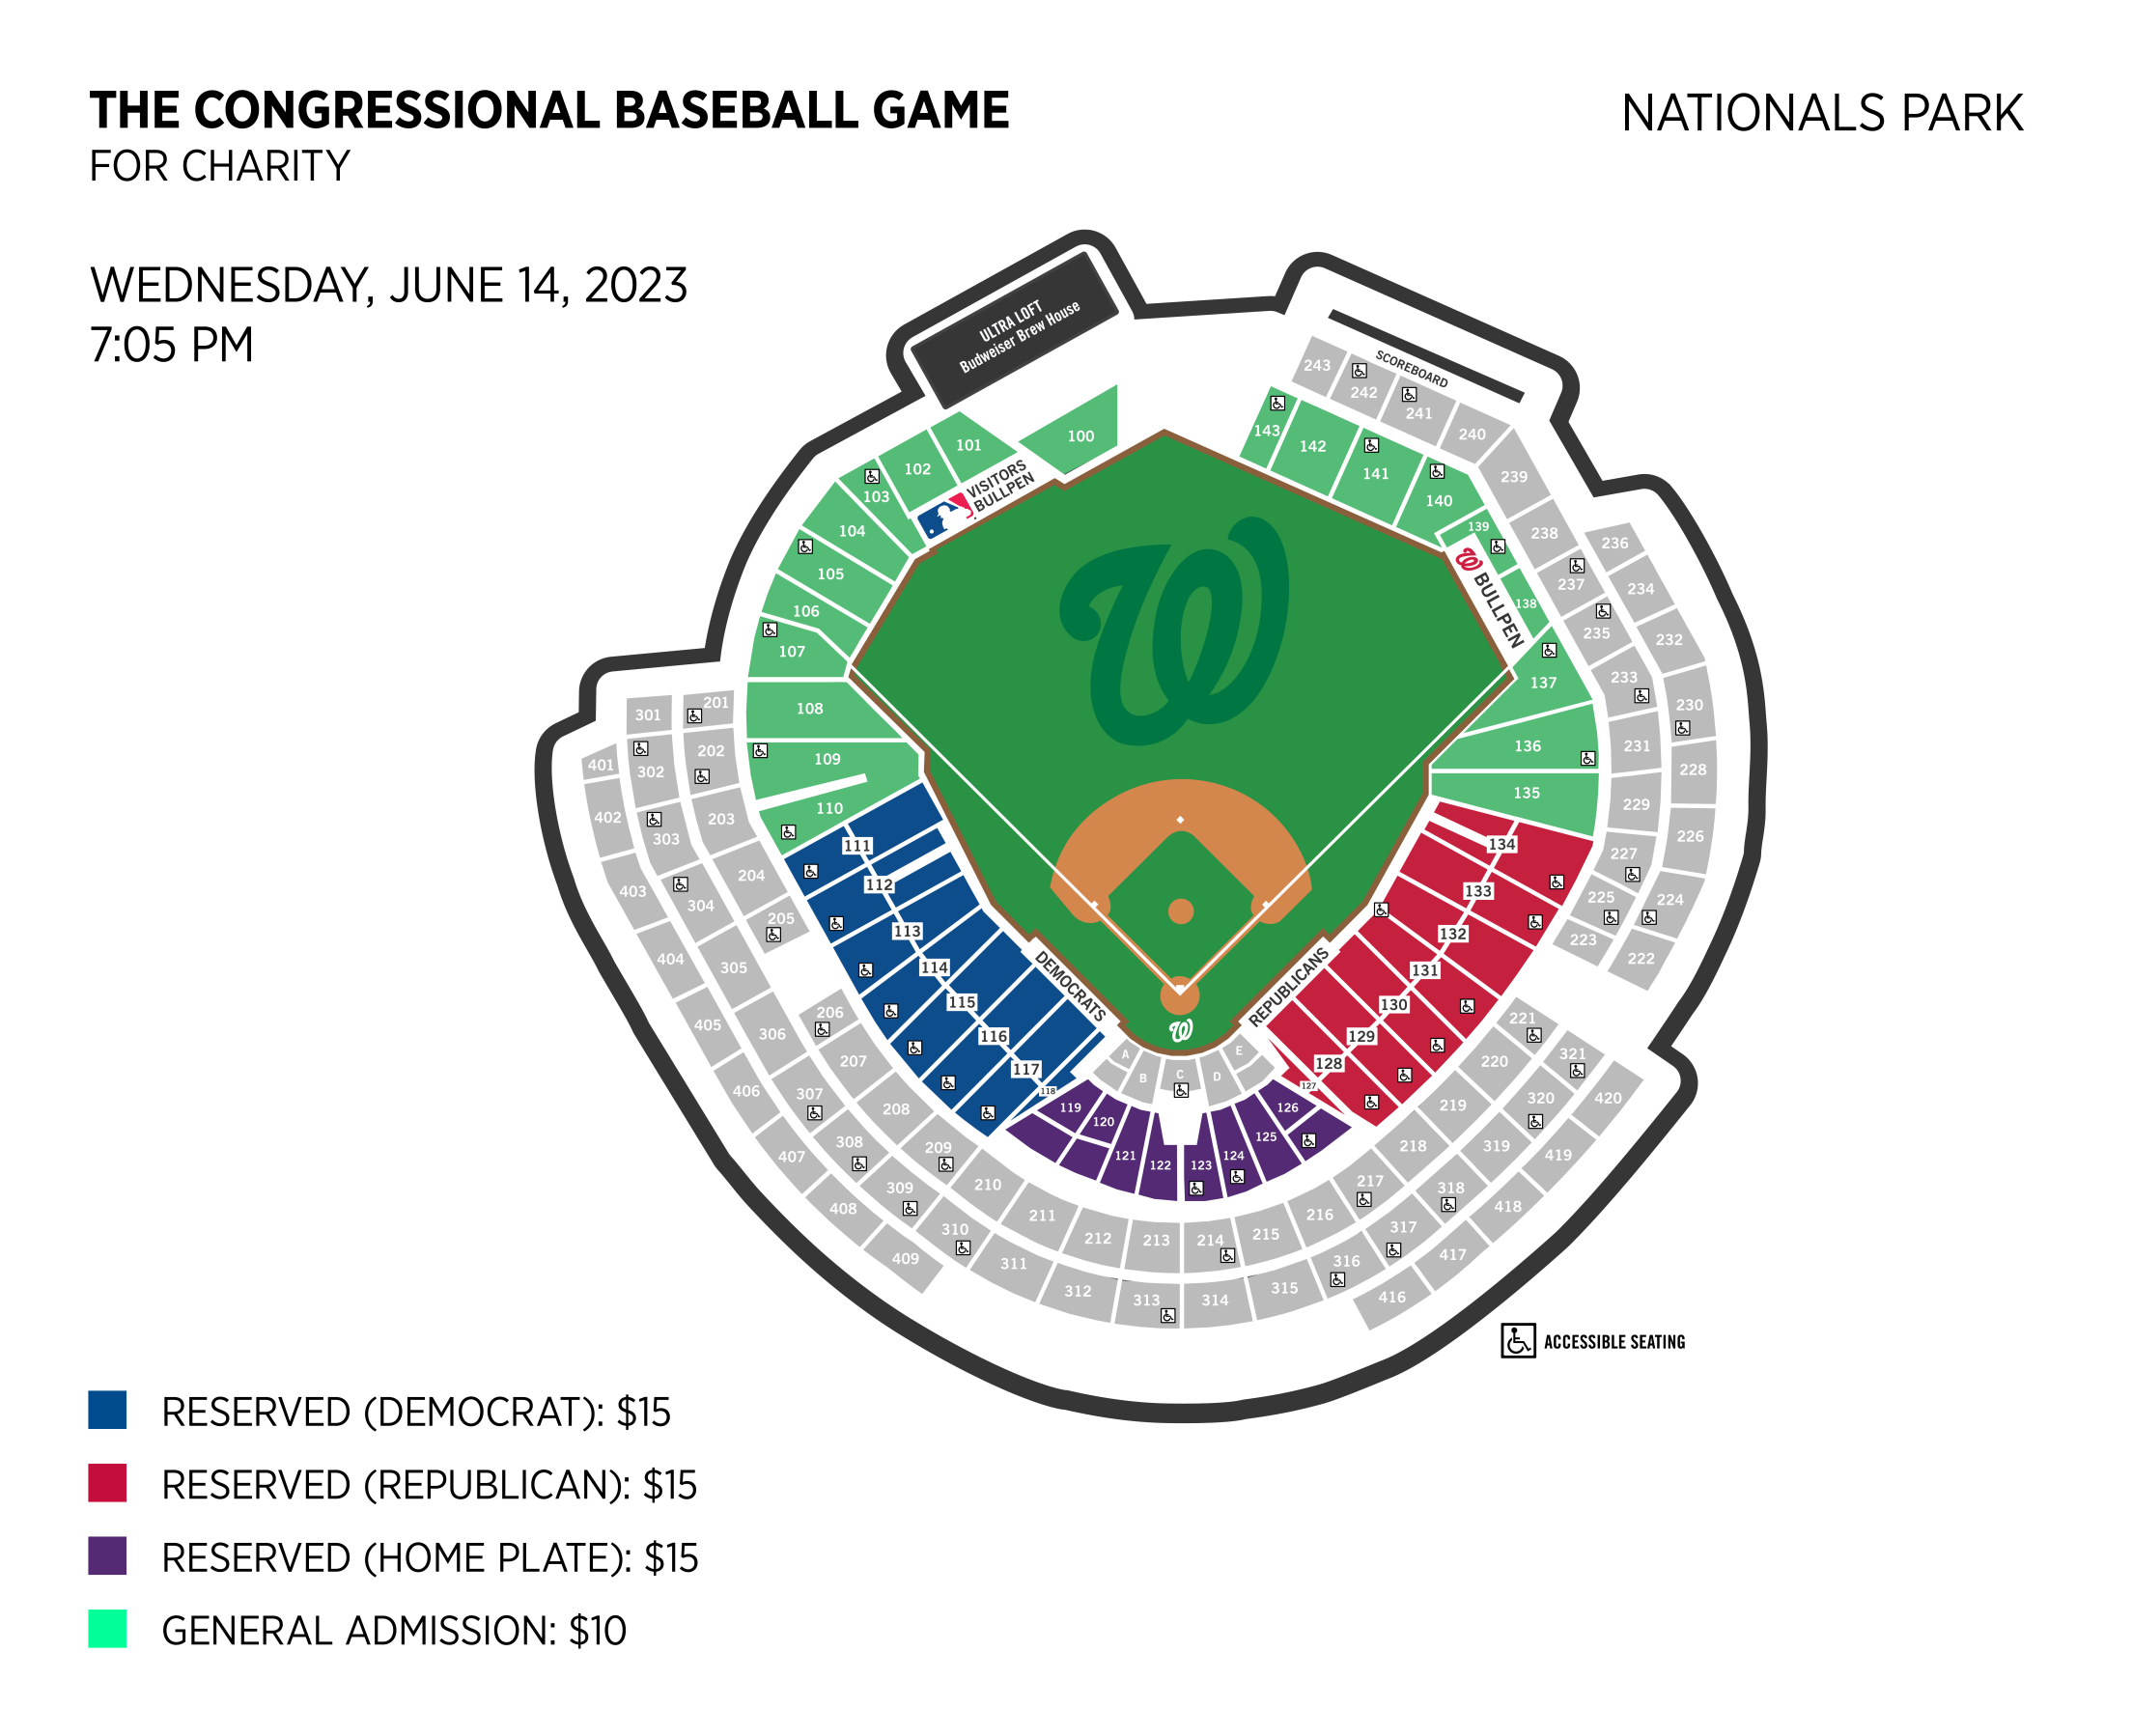 The Congressional Baseball Game for Charity Washington Nationals